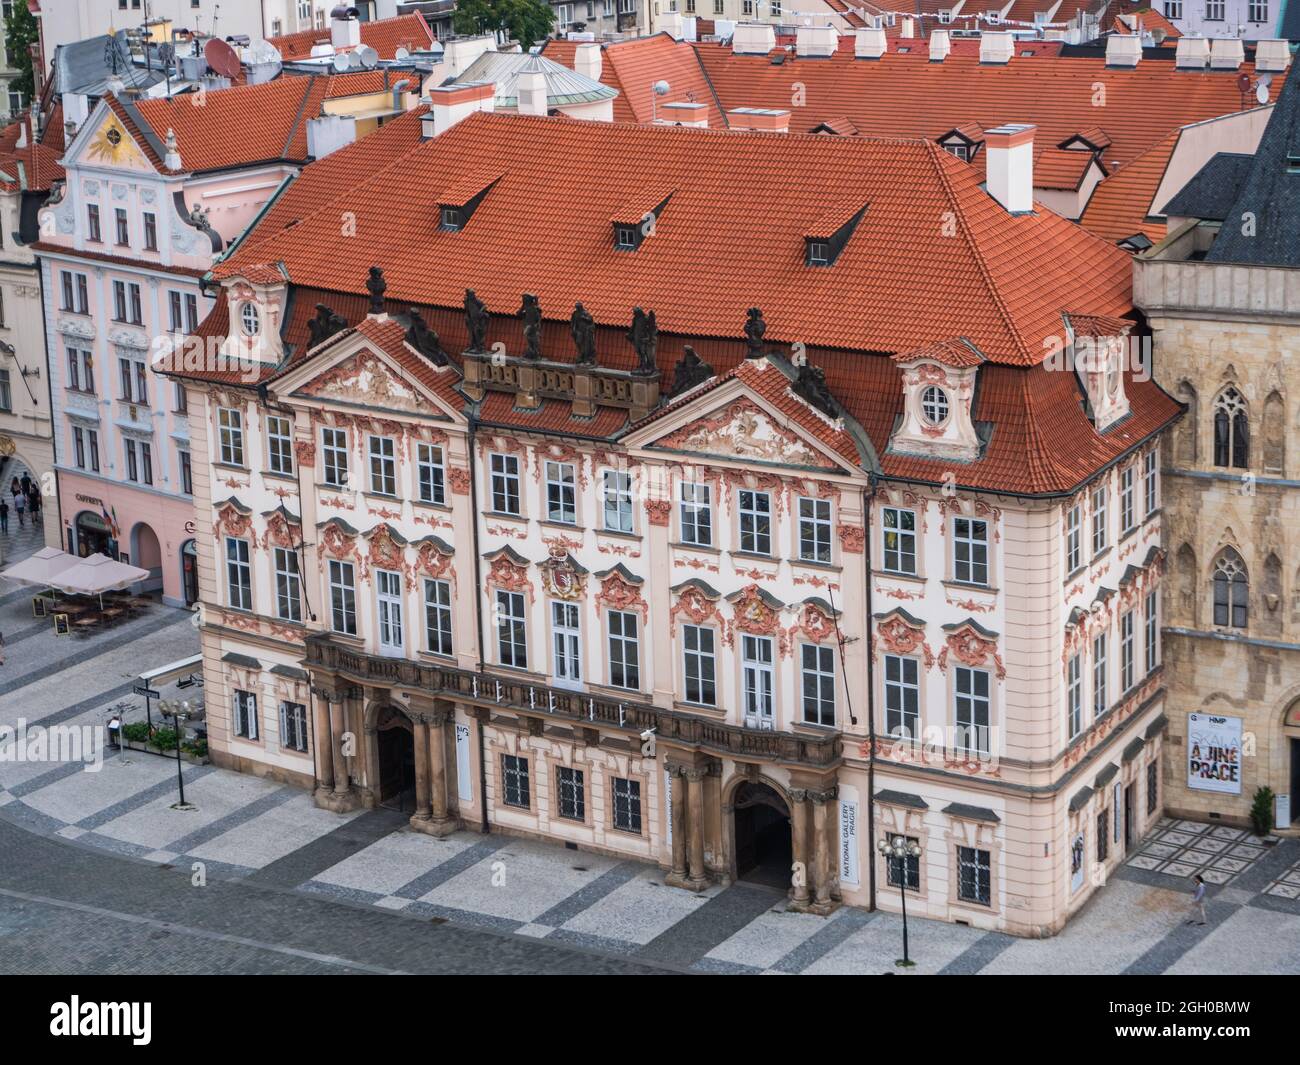 Prague, Czech Republic - July 3 2021: Goltz-Kinsky Palace or Palac Goltz-Kinskych on Old Town Square. A Historic Rococo Building in Czechia. Stock Photo